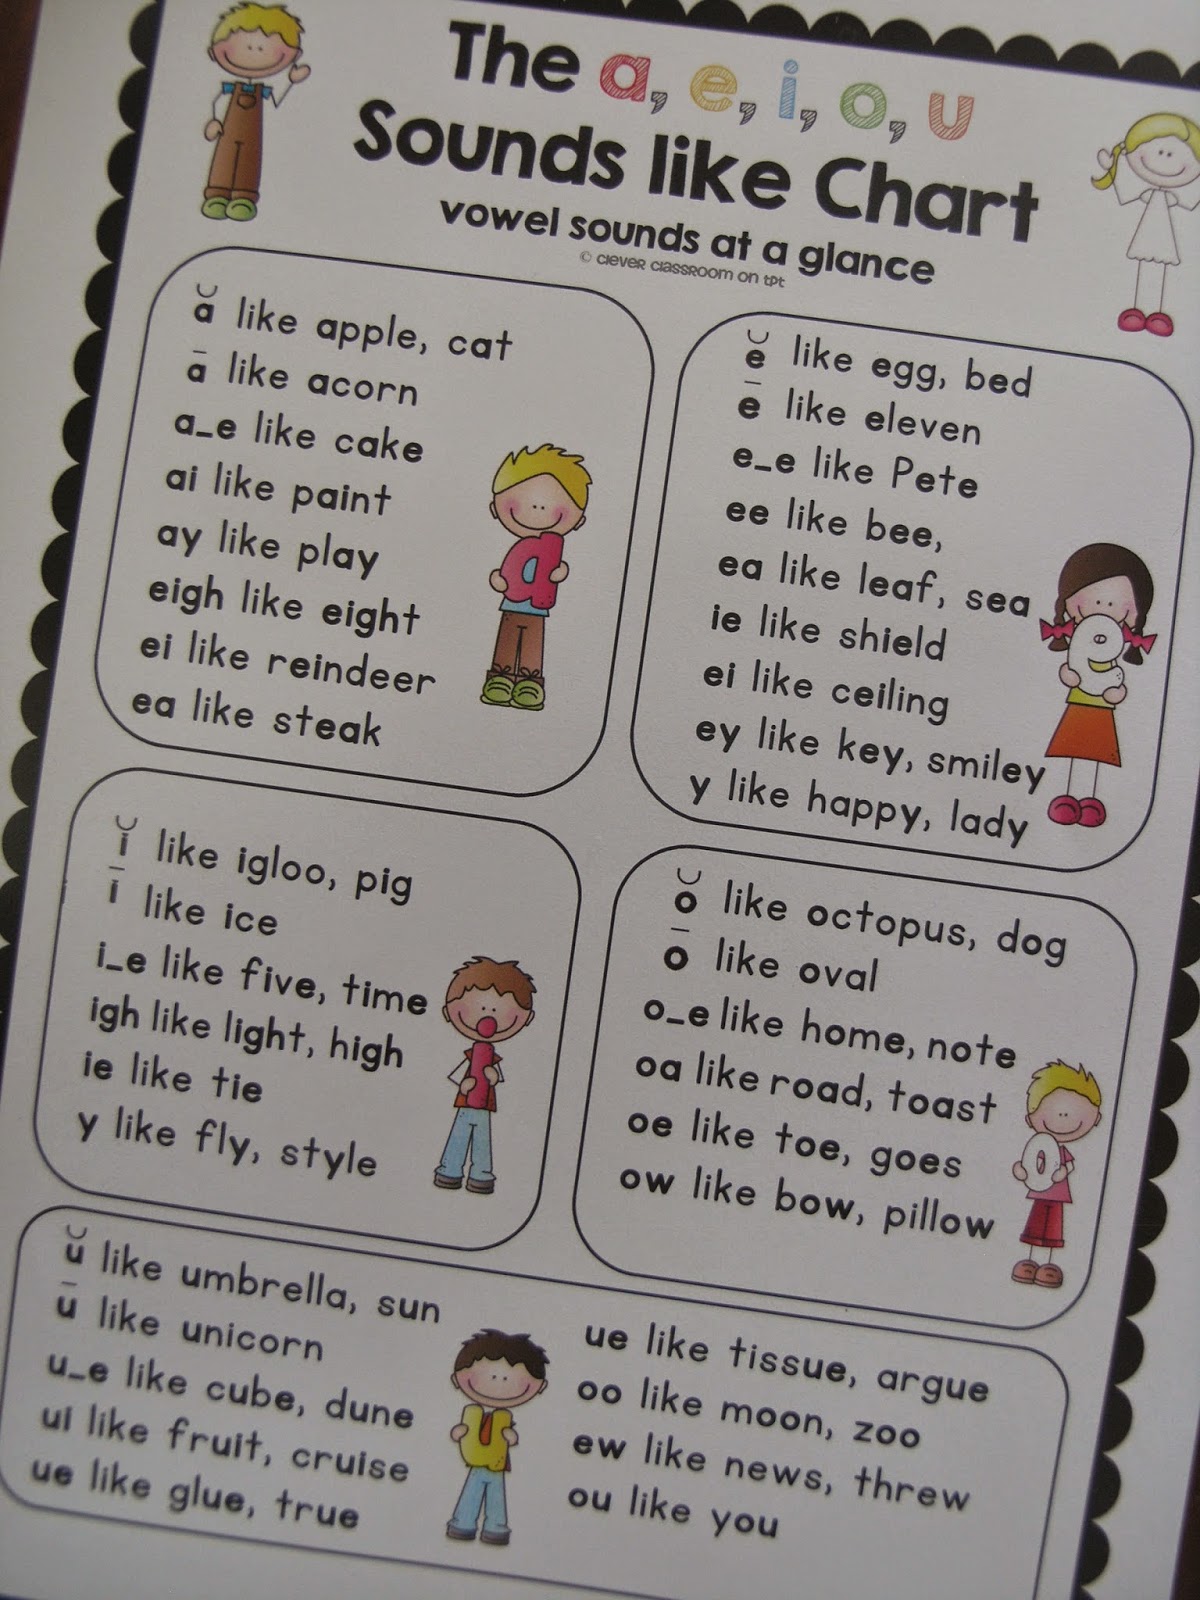 Vowel combinations make different sounds